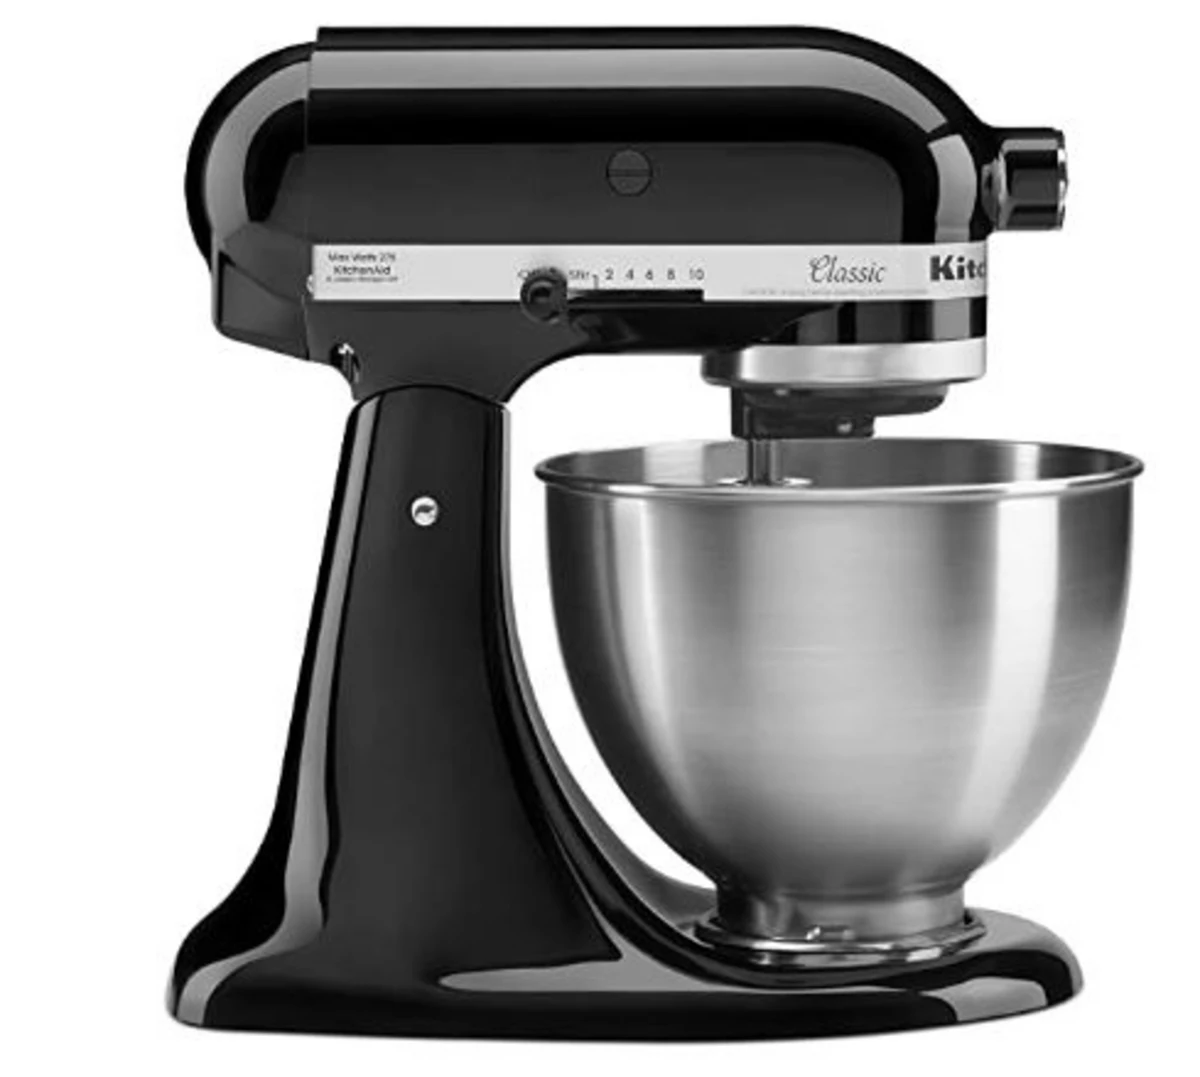 KitchenAid brand white coated stand mixer paddle: 373 ppm Lead + 7 ppm  Cadmium.